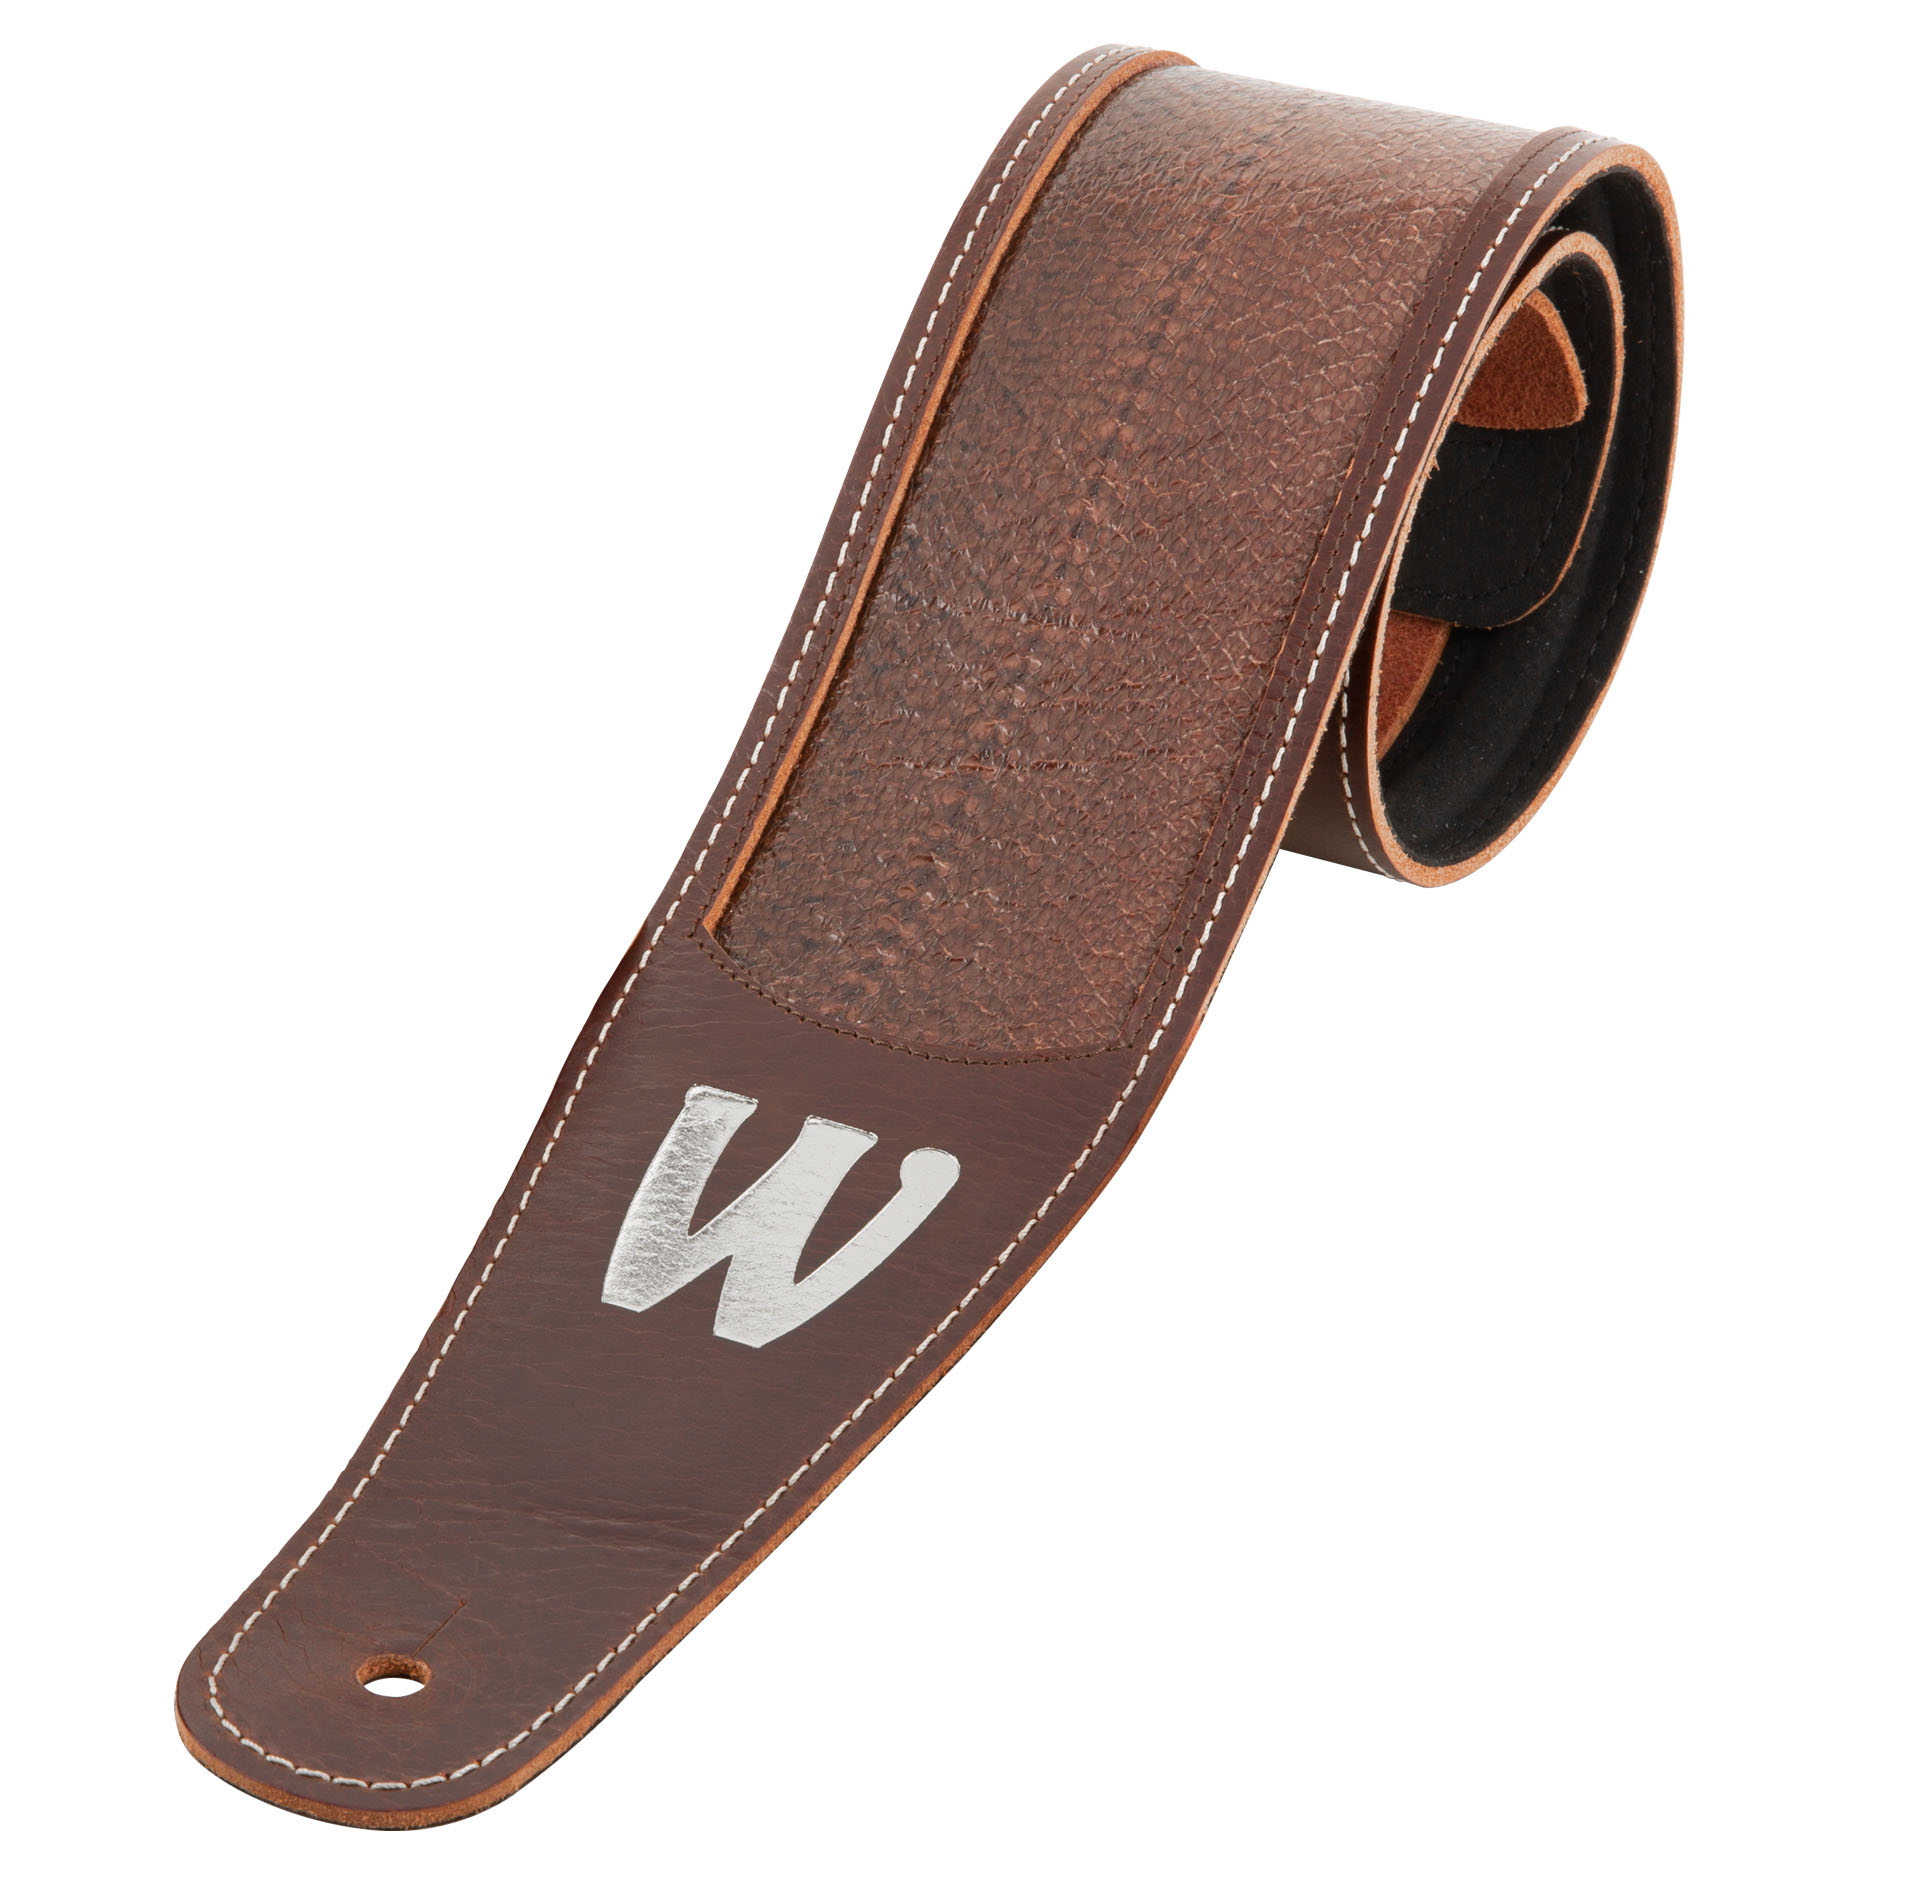 Warwick Masterbuilt Genuine Leather Bass Strap - Brown, Silver Embossing